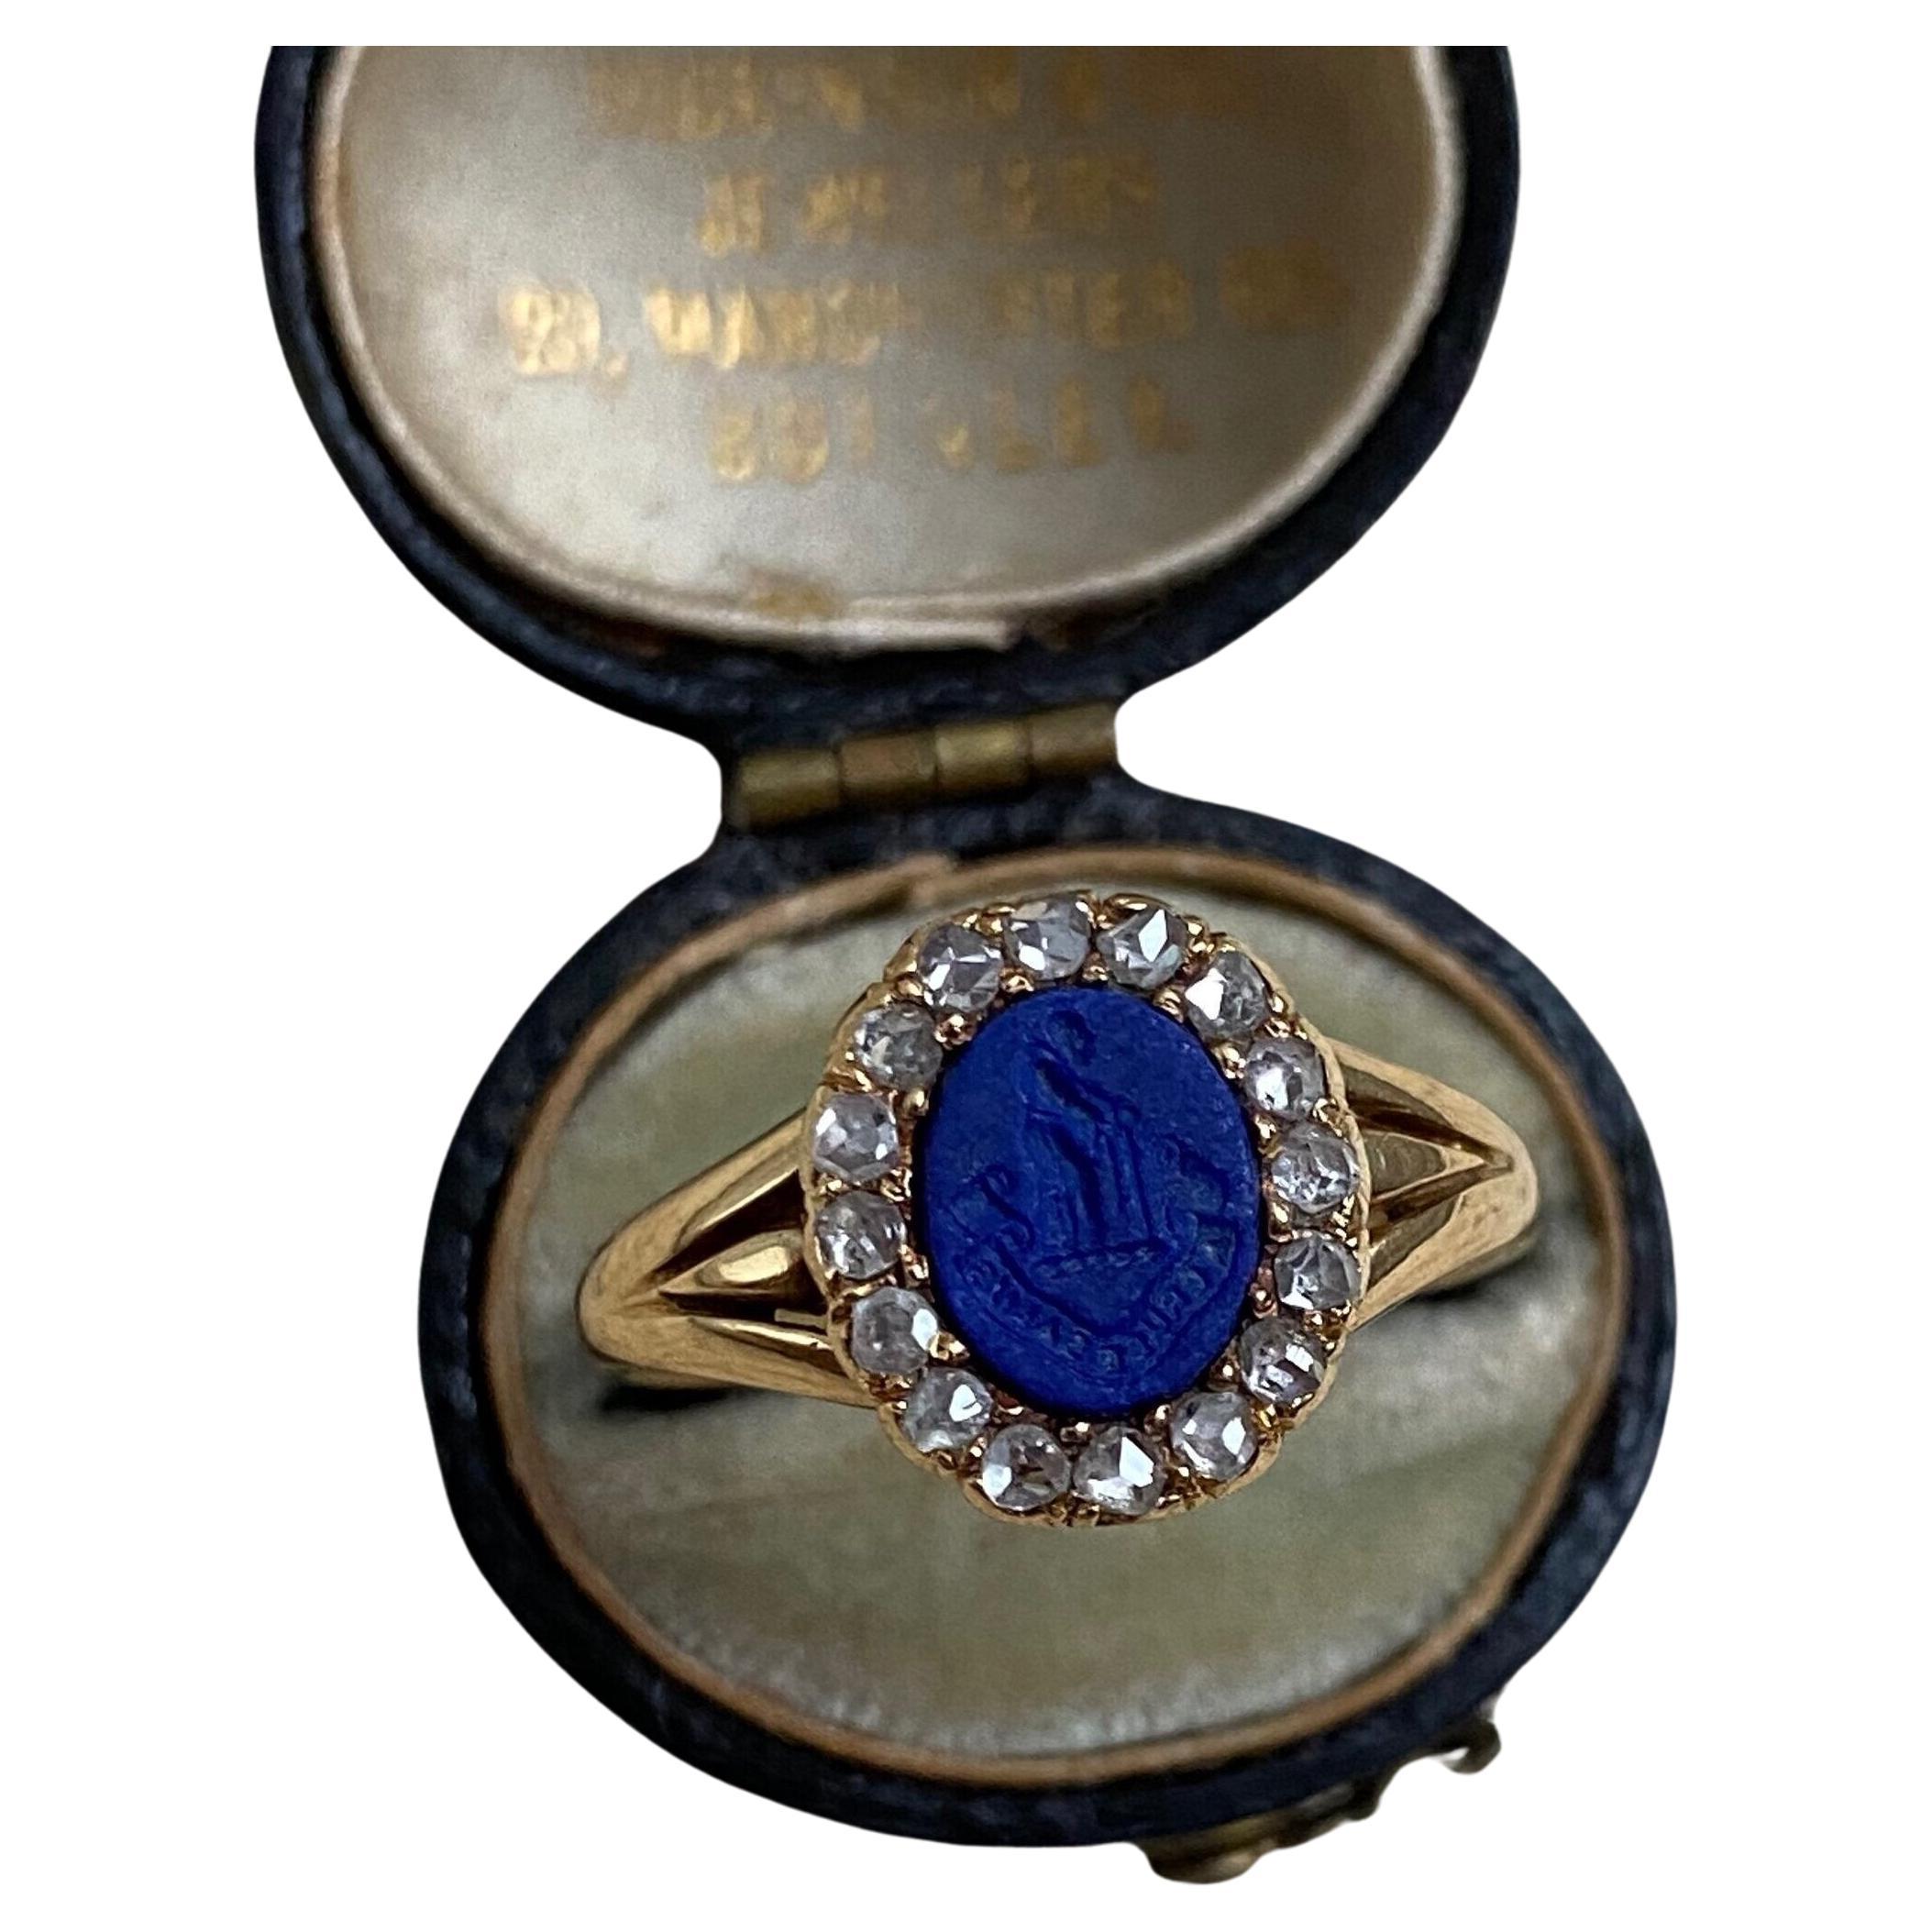 Victorian 18K Lapis Intaglio Ring with Rose Cut Diamond Surround - A Cruce Salus For Sale